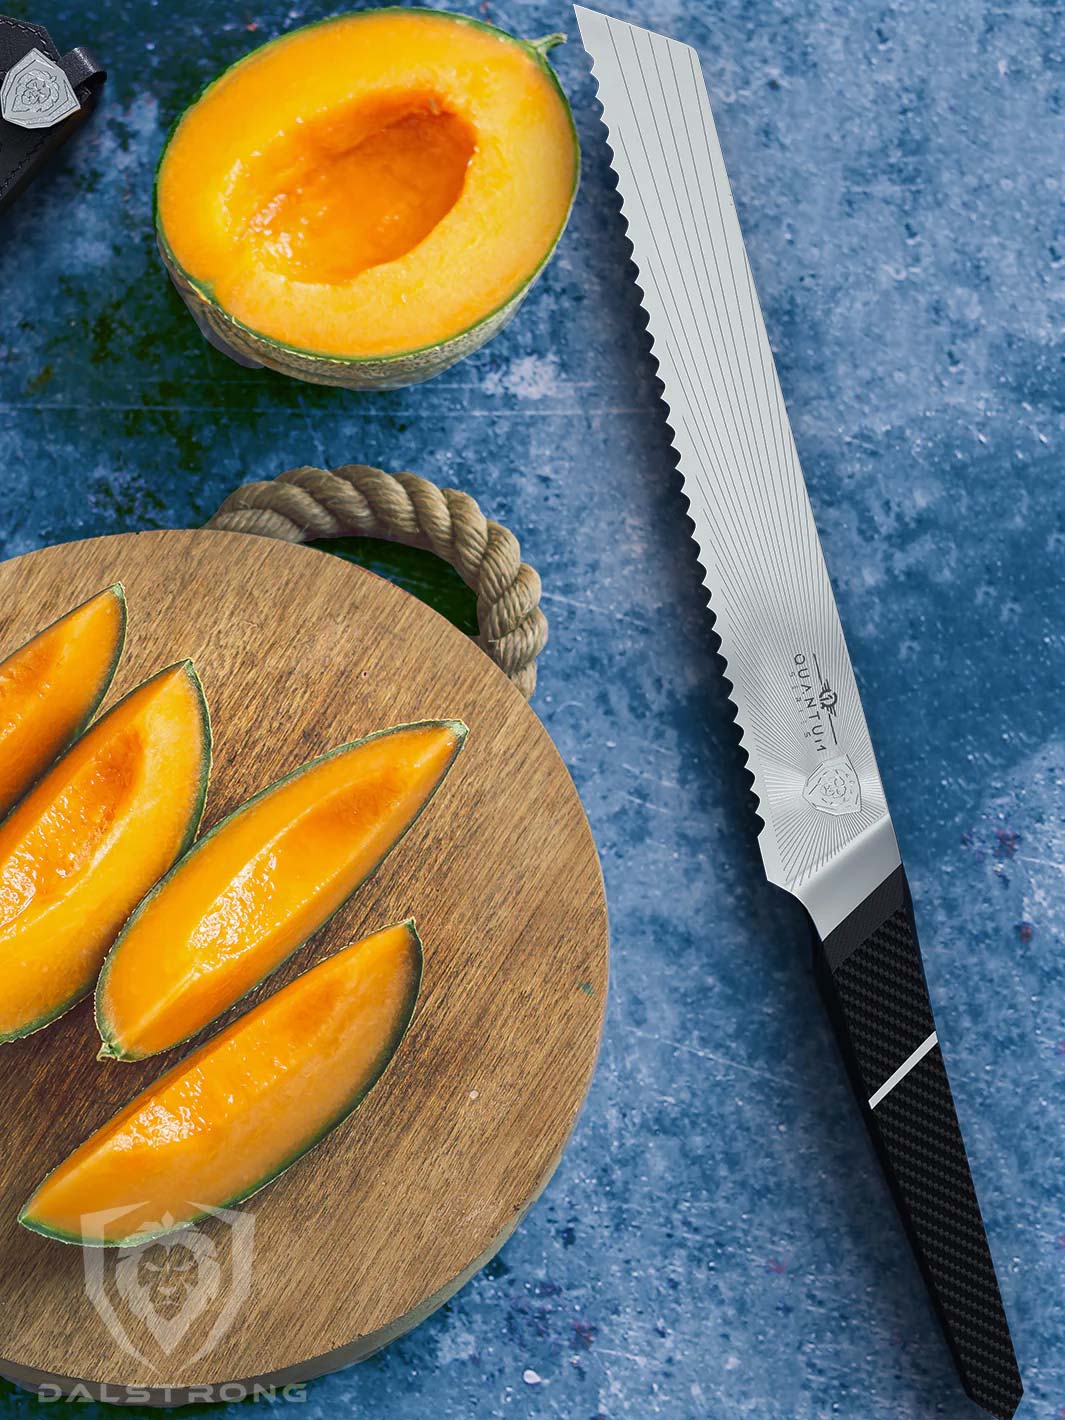 Dalstrong quantum 1 series 9 inch bread knife with slices of cantaloupe on a cutting board.